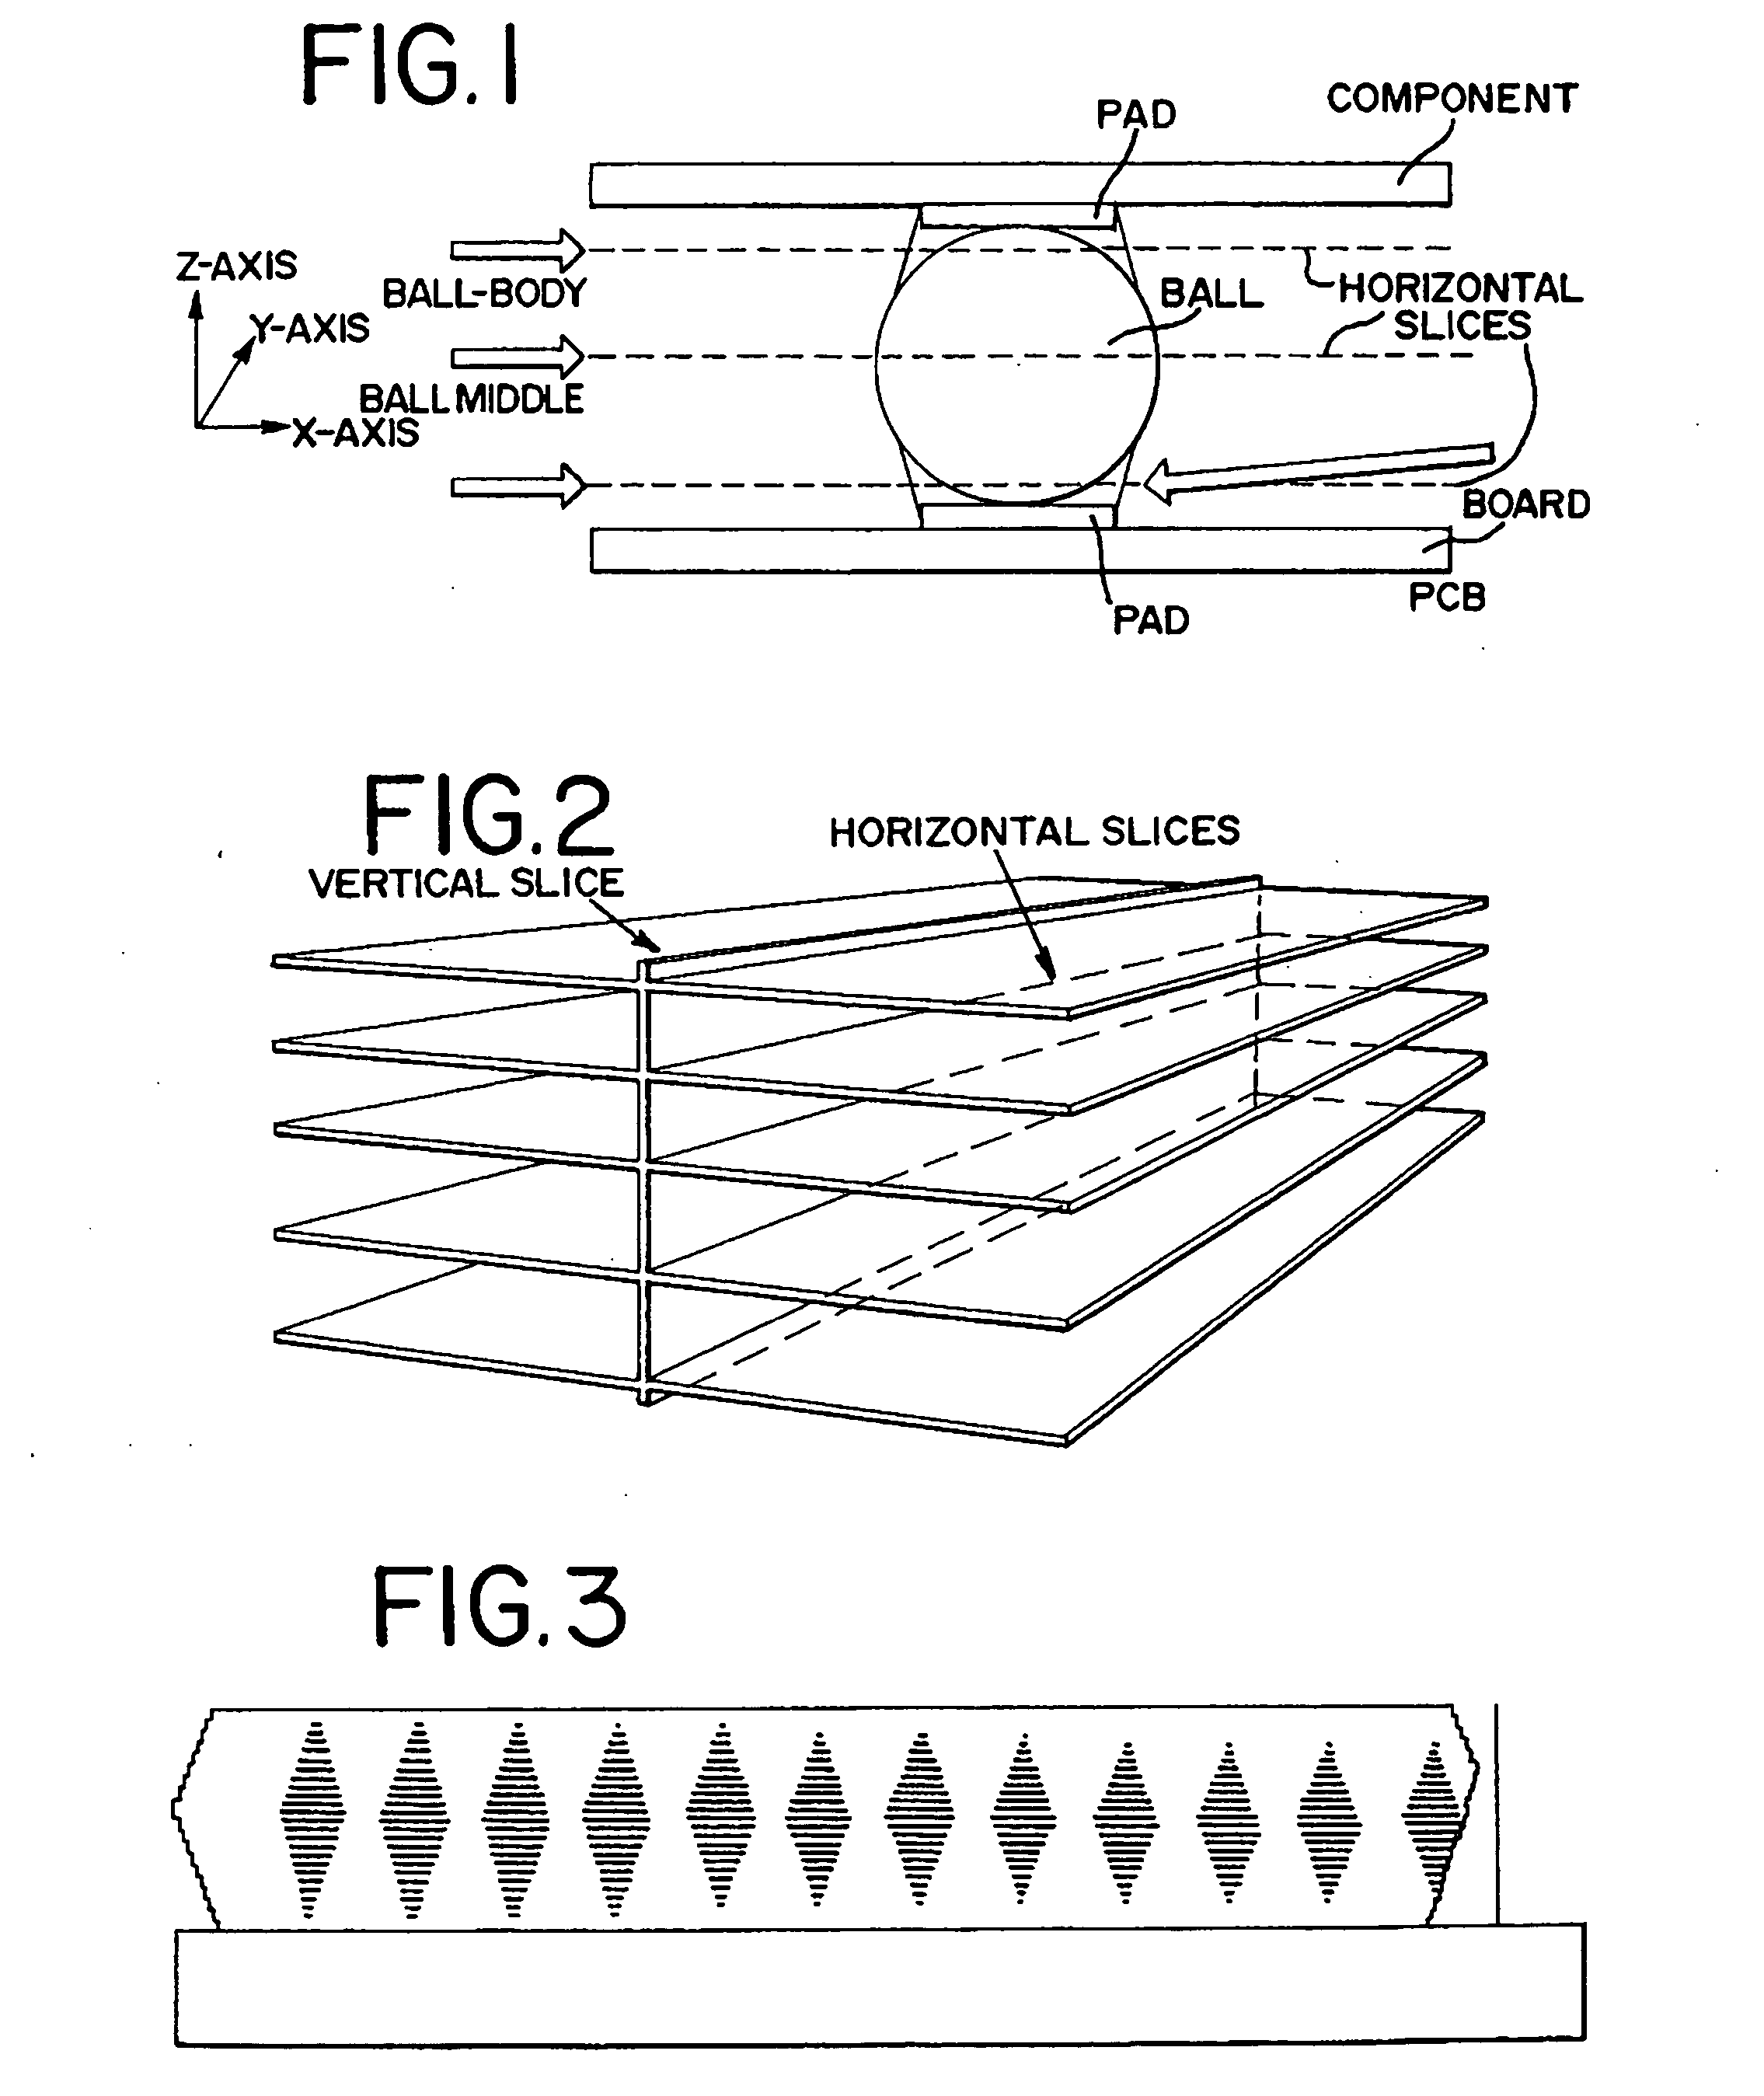 Method for inspecting a region of interest